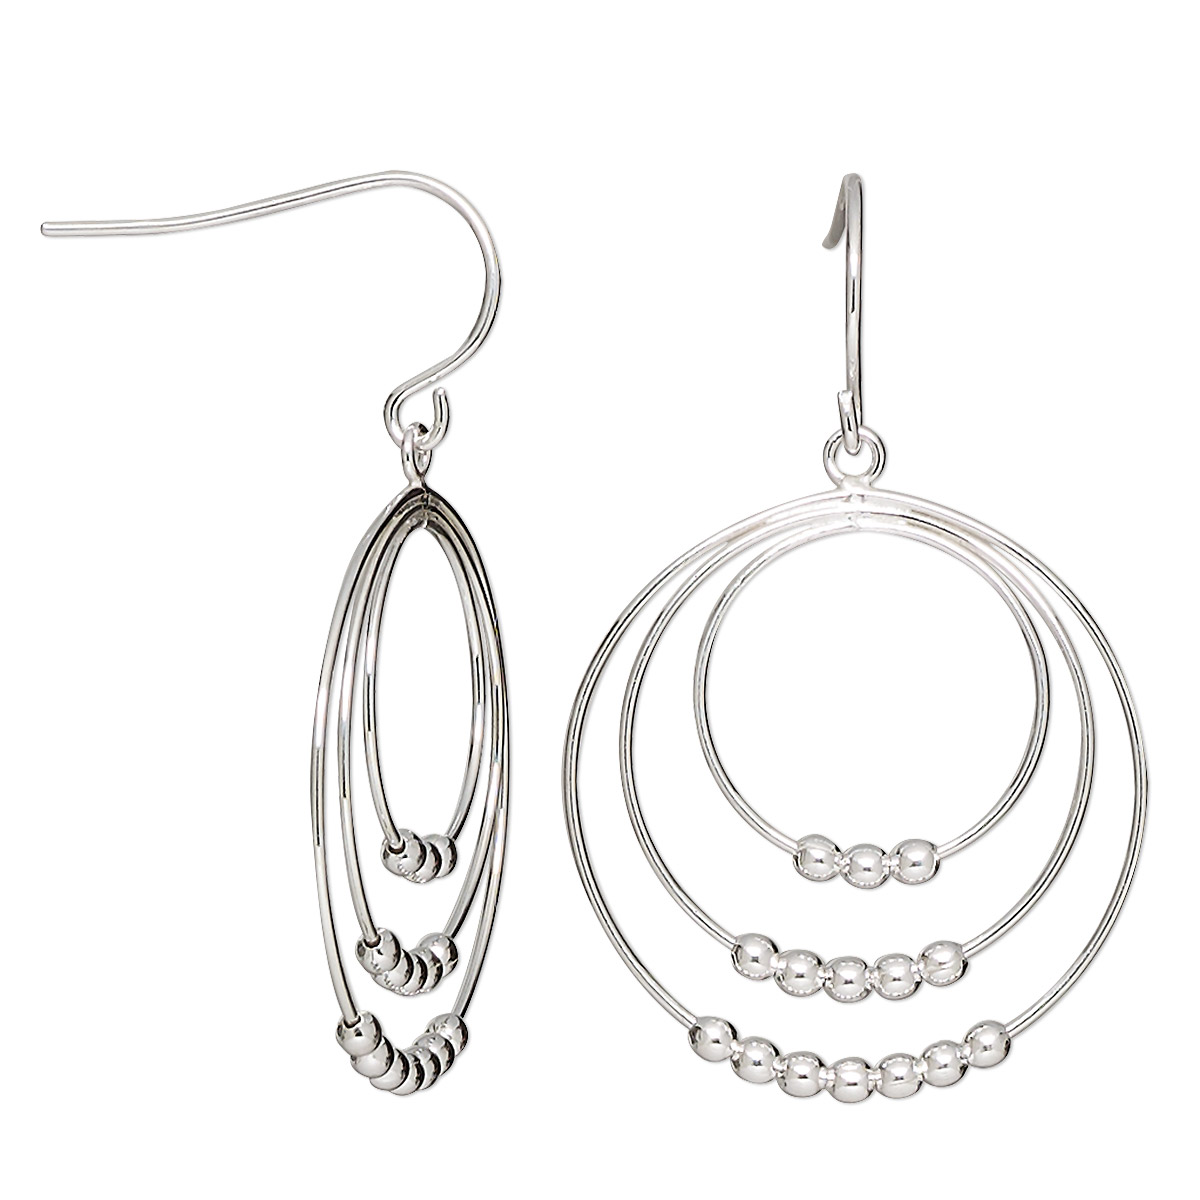 Earring, sterling silver, 39.5mm hoop with 3 rings and 2mm round. Sold ...